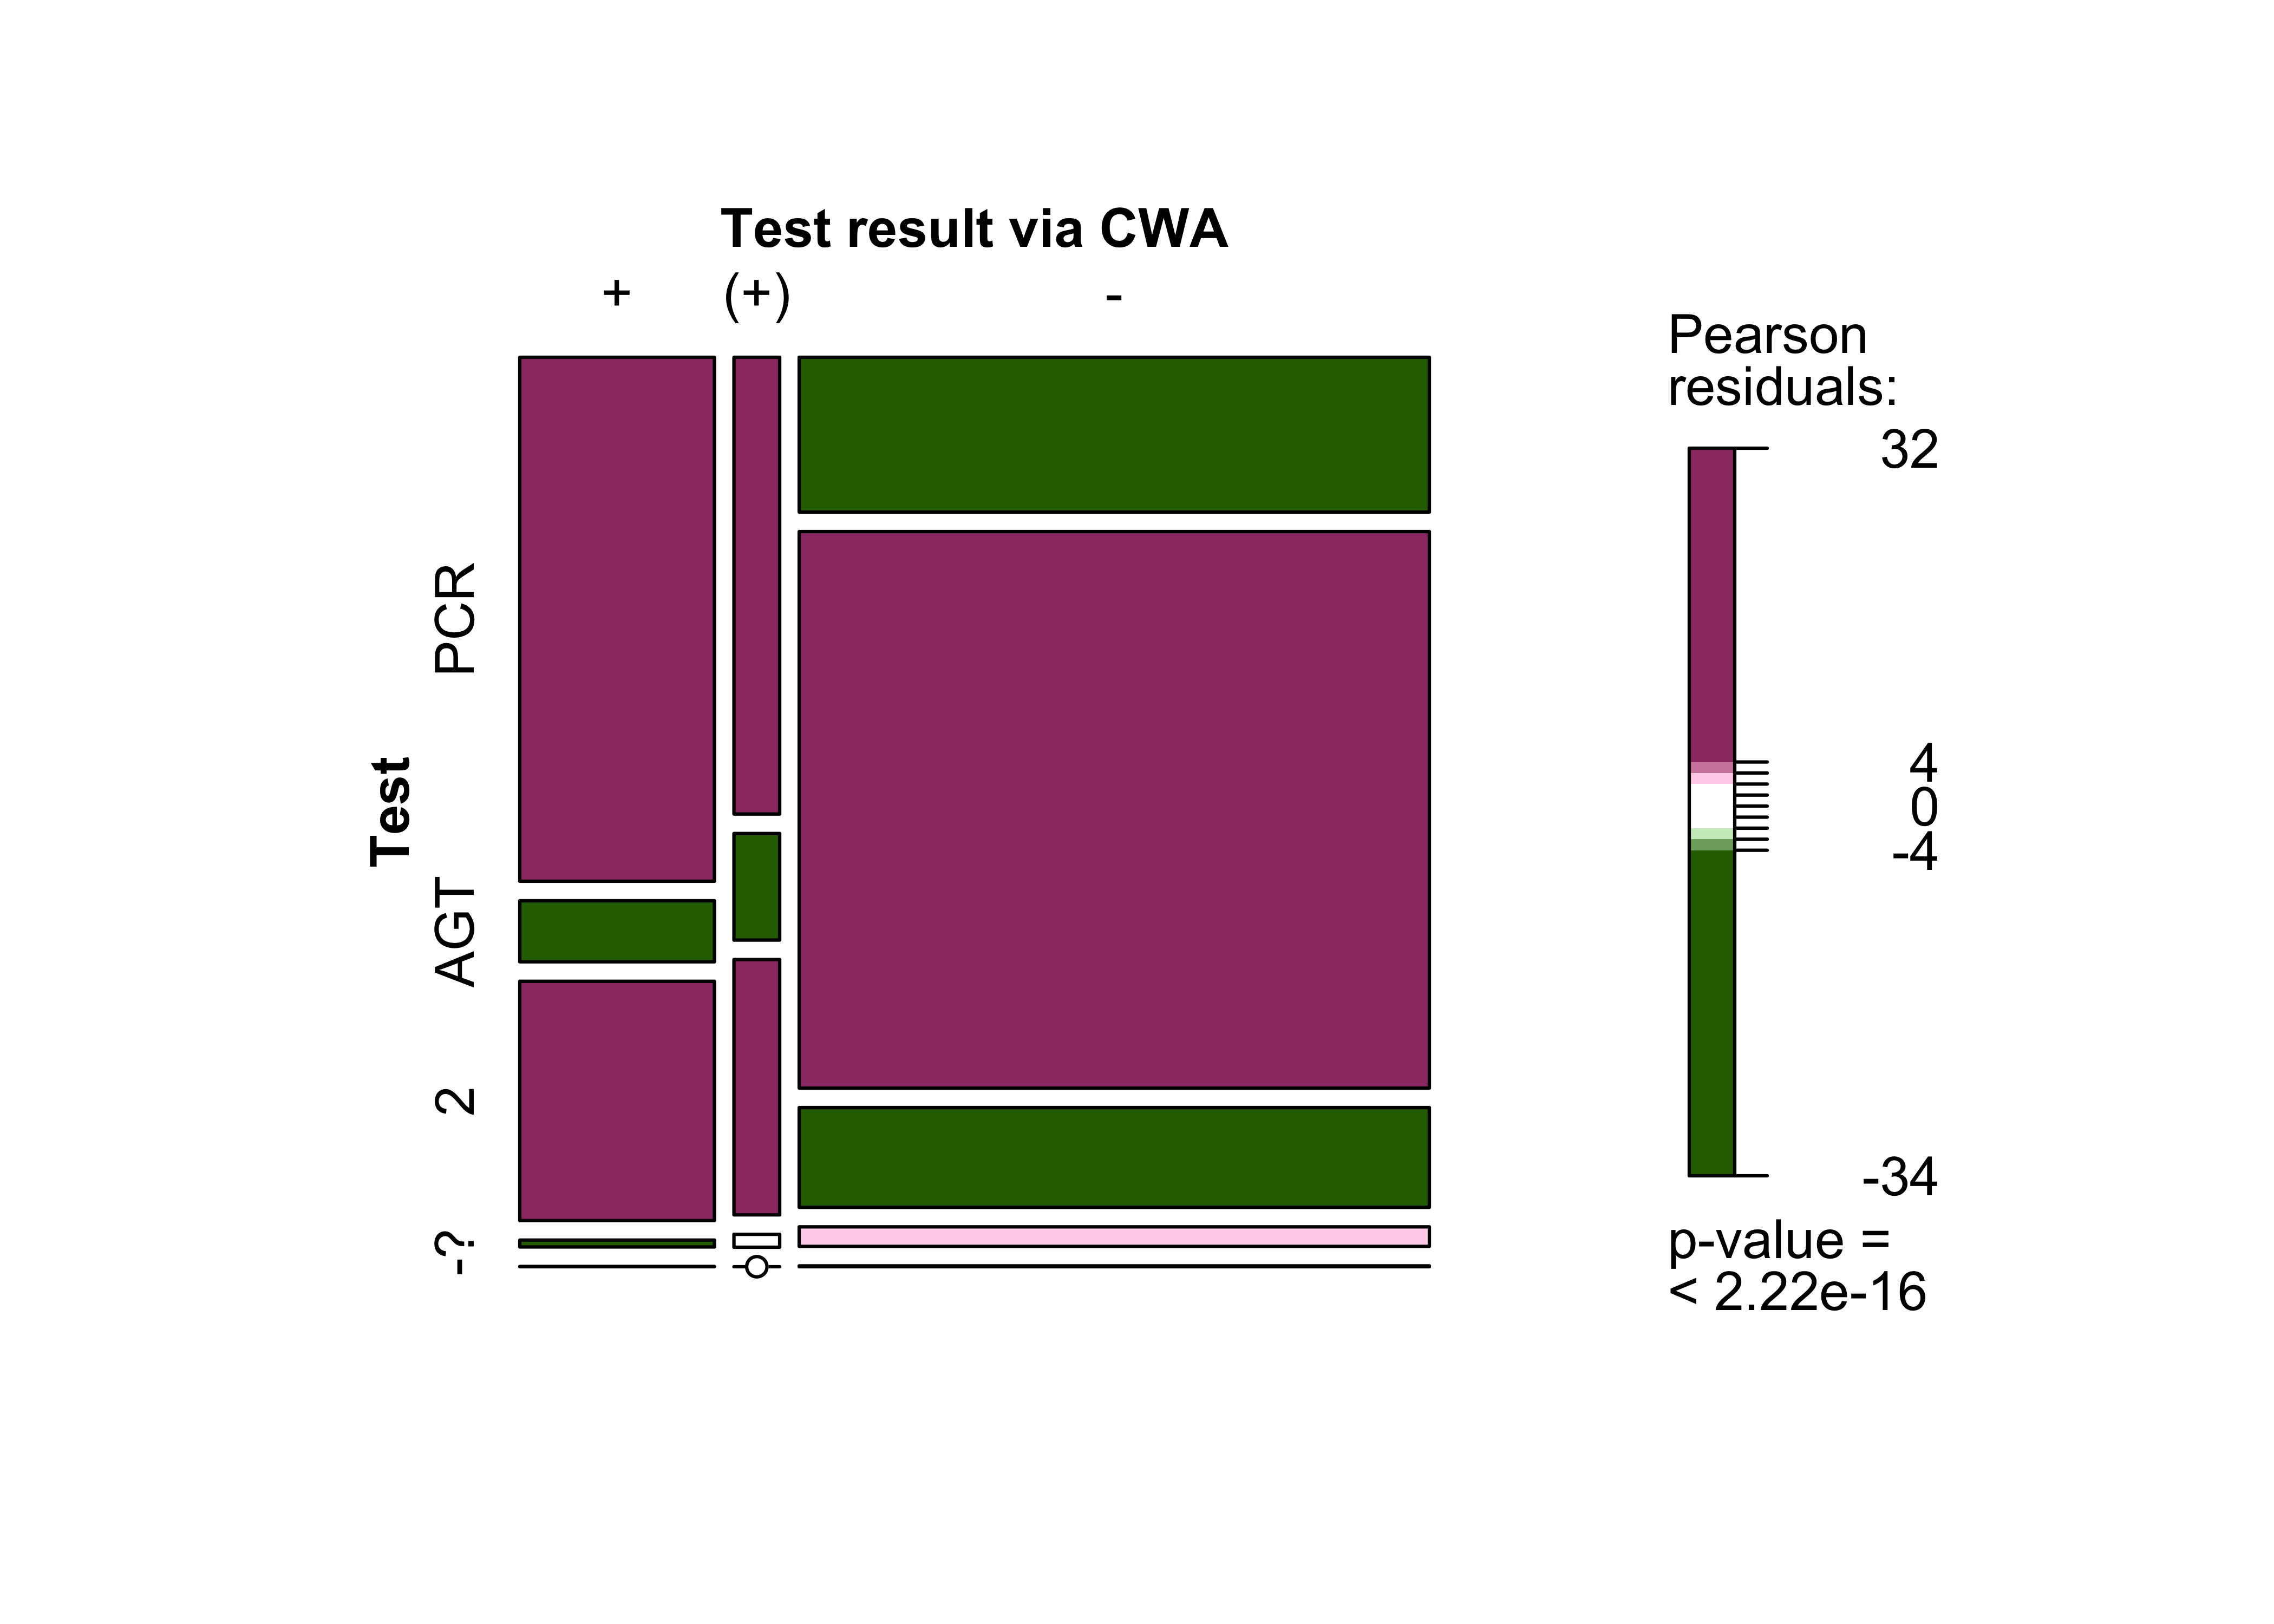 Fig. 13: EDUS - Relationship between tests carried out and receiving a test result via the CWA .